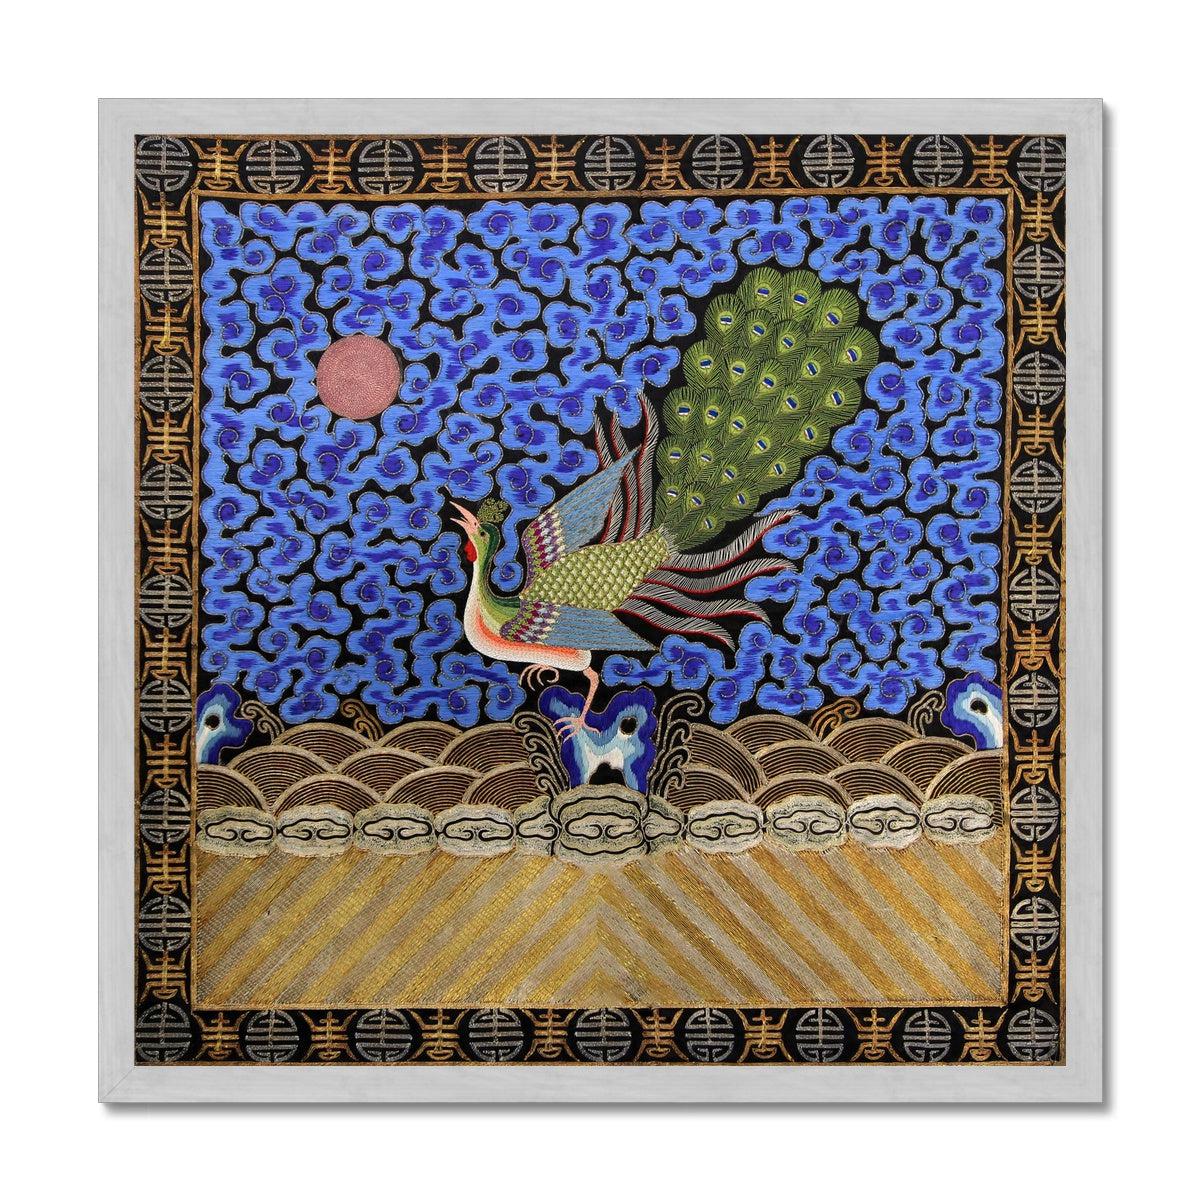 Fine art 20"x20" / Silver Frame Peacock Mandarin Square  | Traditional Chinese Qing Dynasty Silk Embroidery Design | Antique Framed Fine Art Print